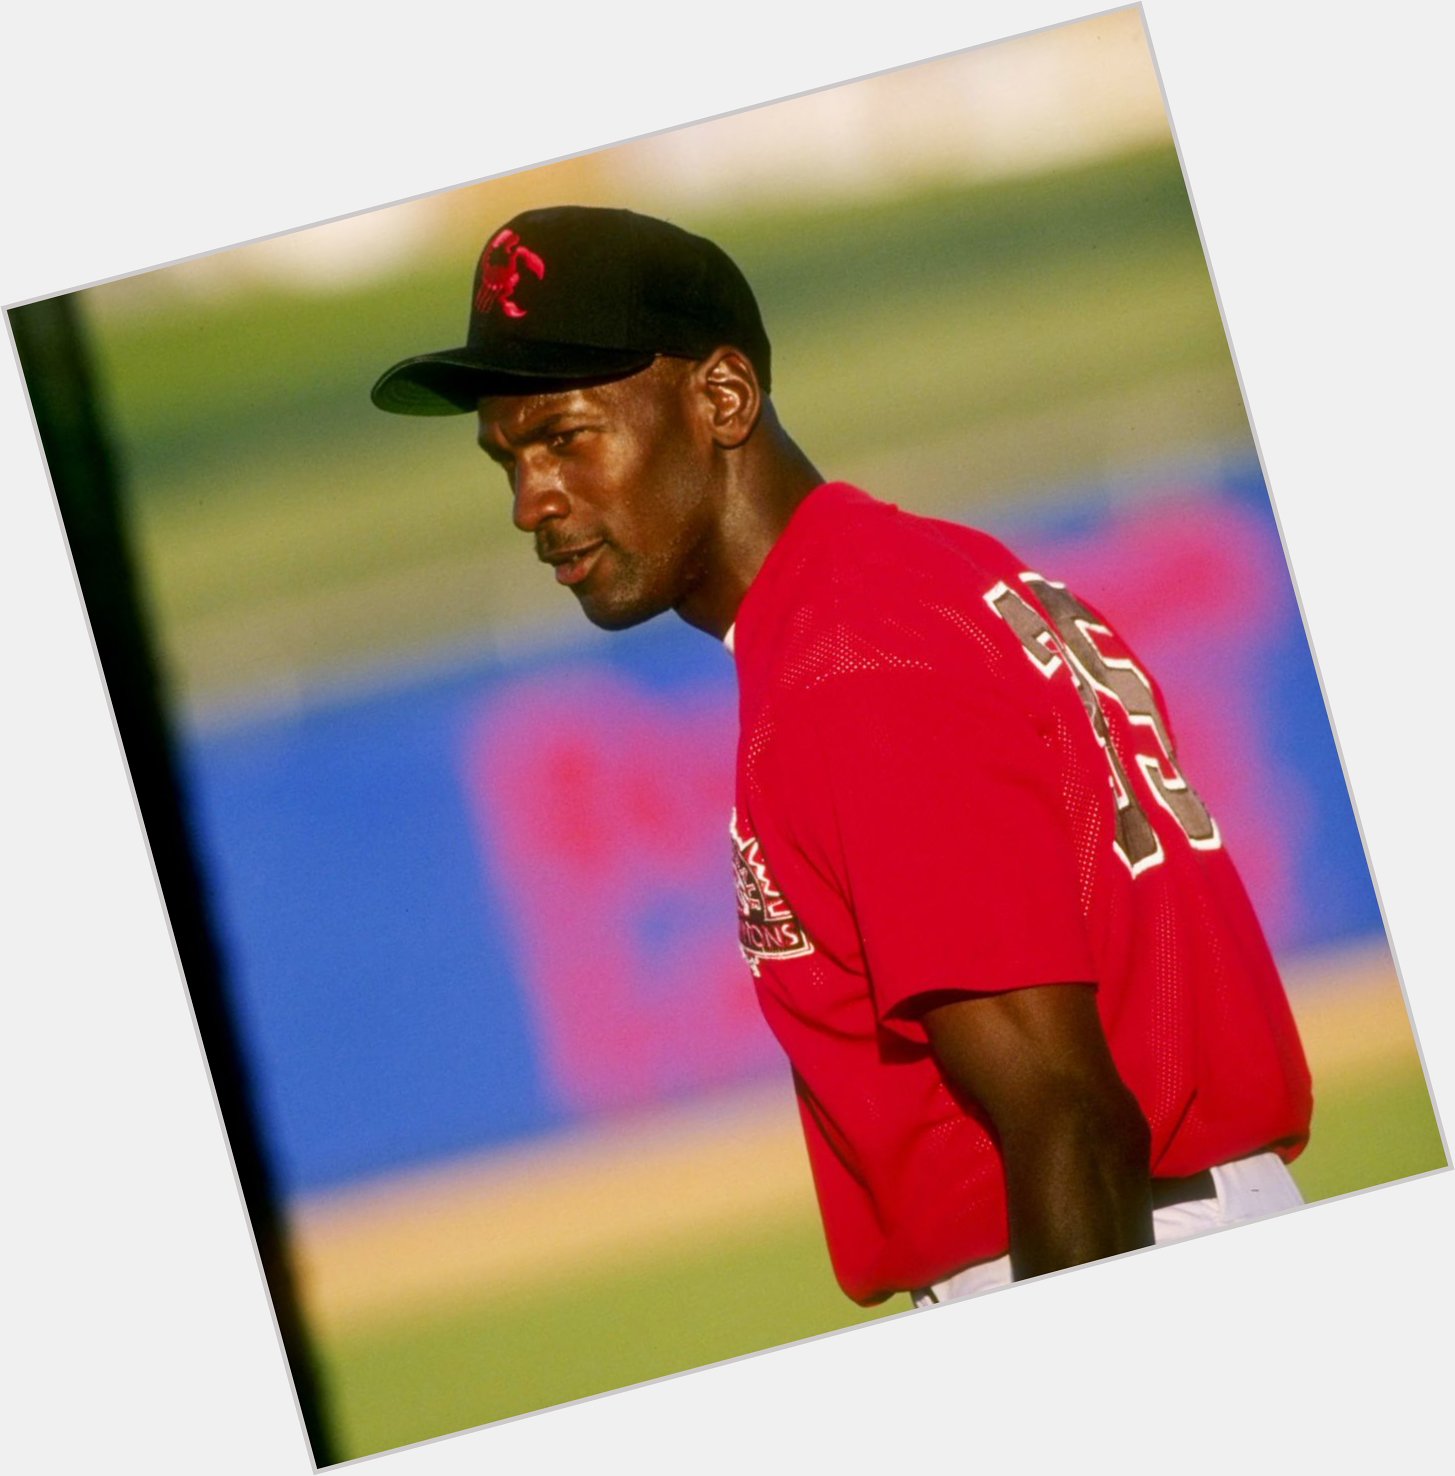 Happy Birthday to Michael Jordan! Among some other minor accomplishments, MJ is a former Scottsdale Scorpion 